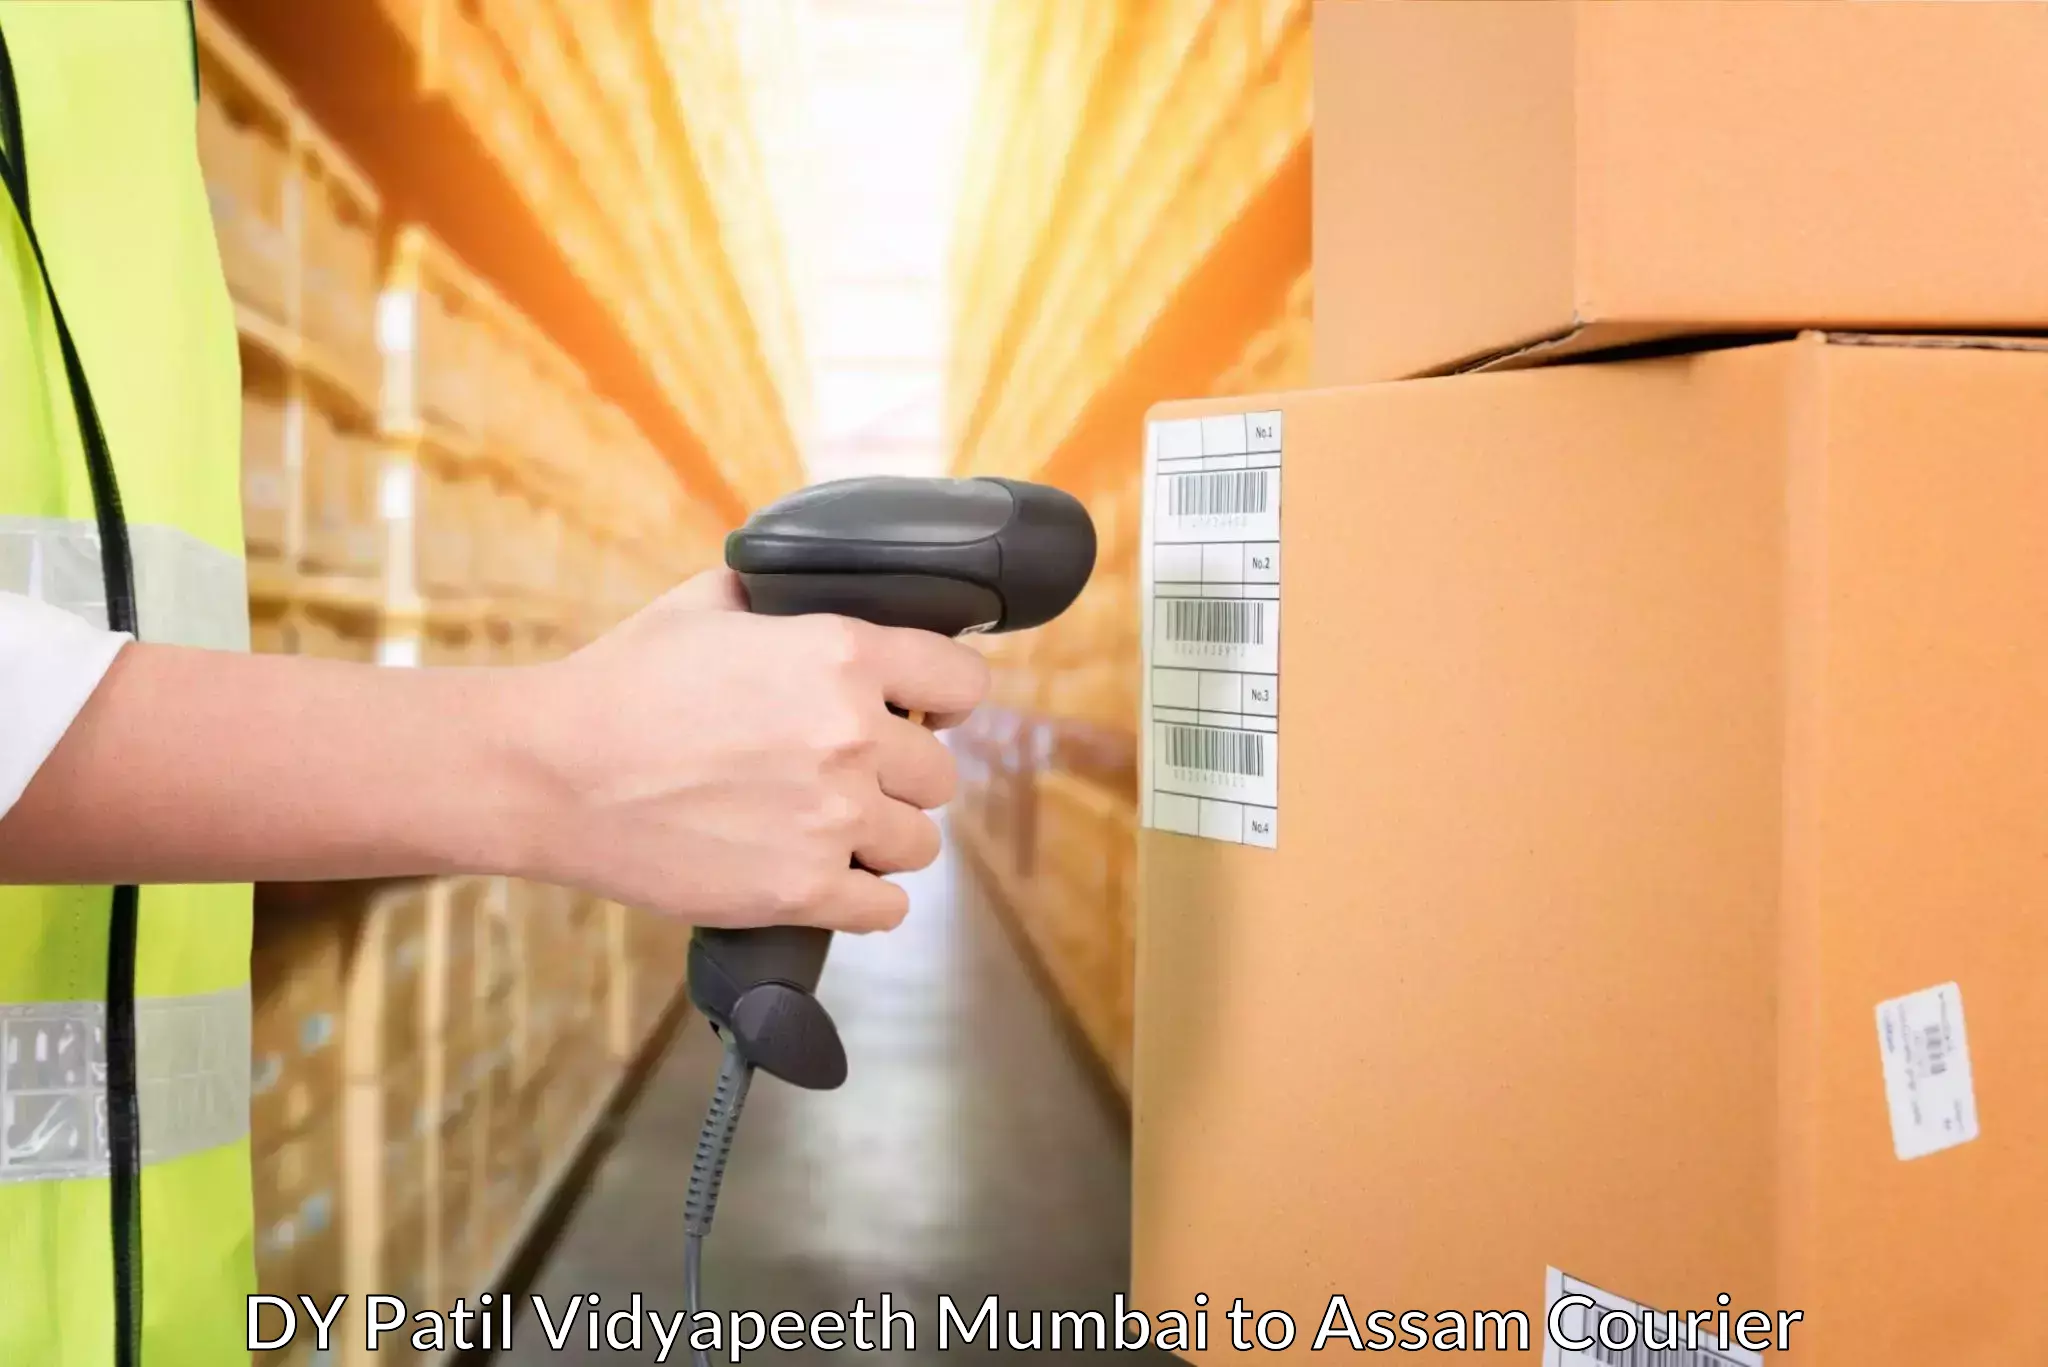 Efficient courier operations DY Patil Vidyapeeth Mumbai to Tezpur